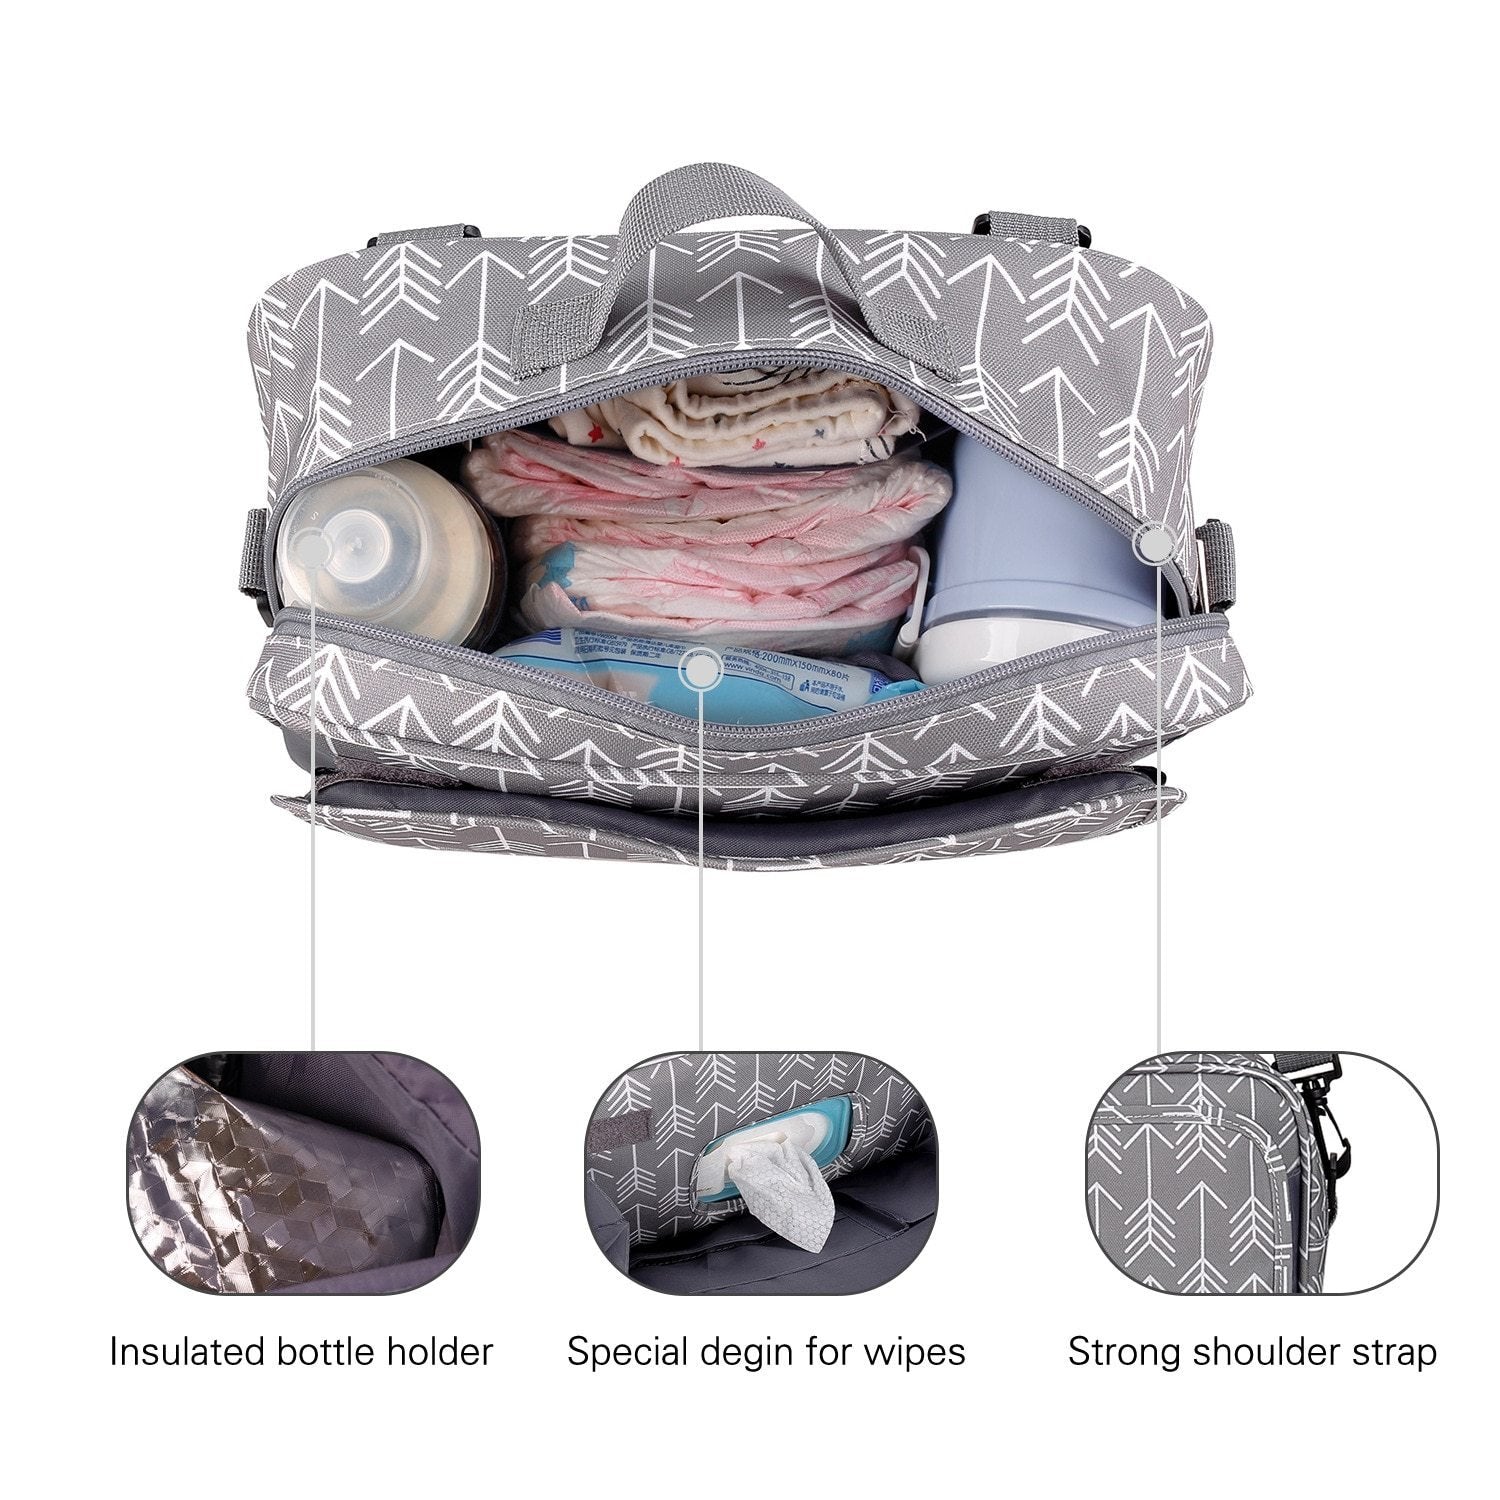 Baby Stroller Organizer Bag with Easy Access Baby Wipes Pocket, Shoulder Strap, mobile phone and personal items (Choice of 6 Styles) - Baby Mood Lamp